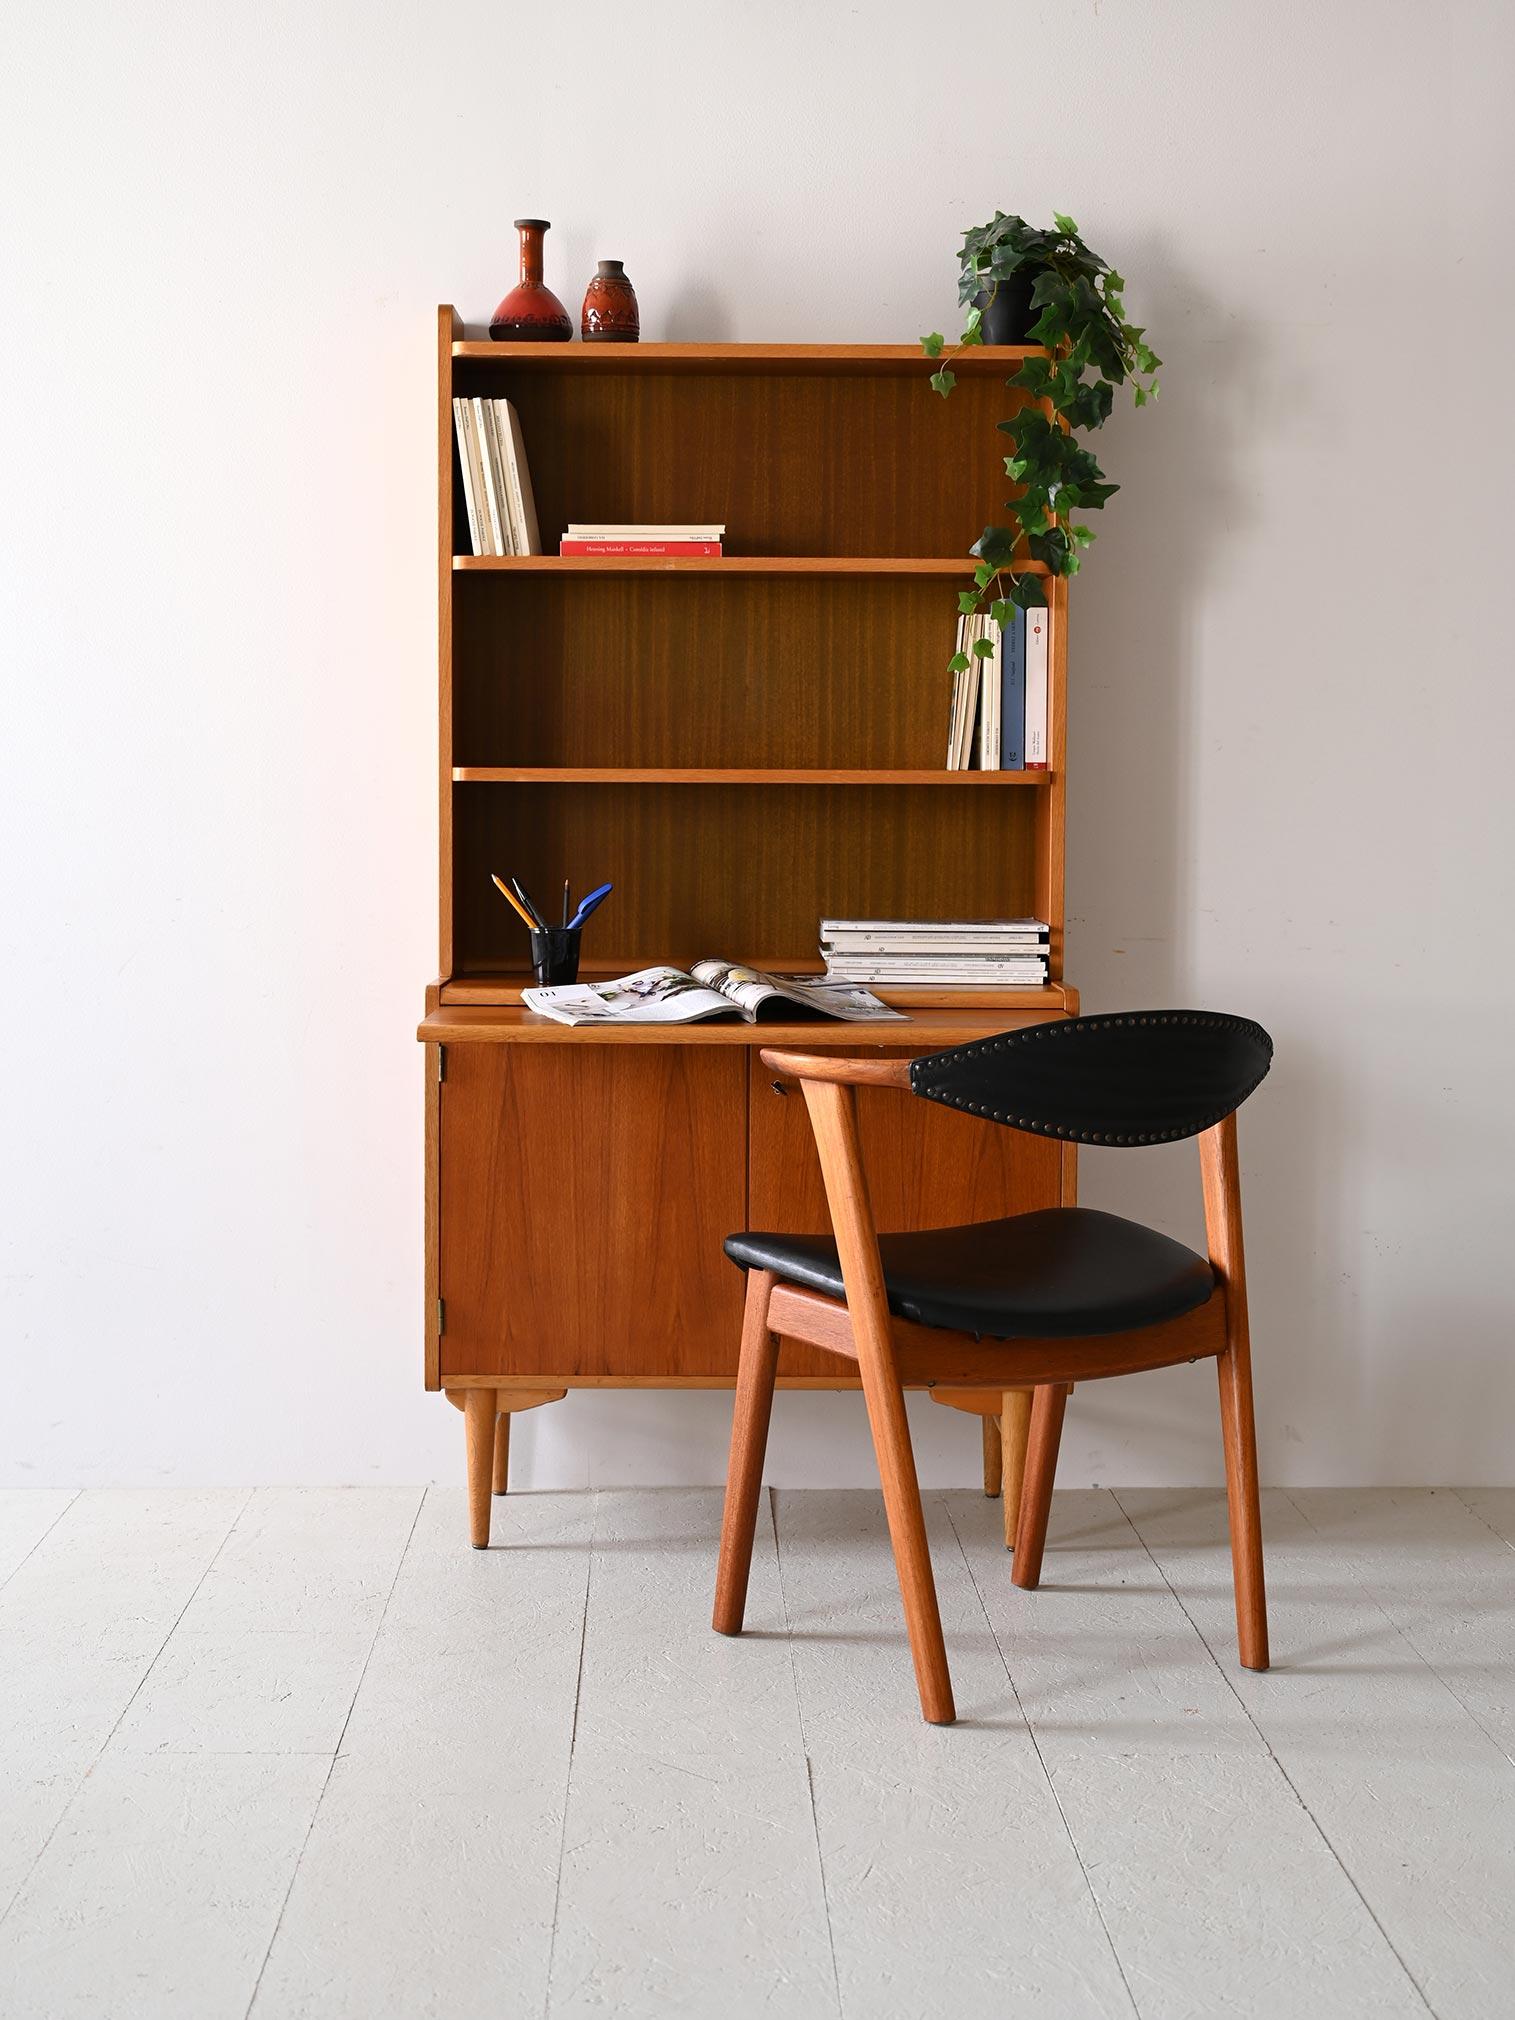 Scandinavian cabinet with shelving and storage compartment.

This Nordic teak bookcase features a frame with open shelves that rests on the cabinet with hinged doors.
There is also a pull-out shelf that provides an additional surface for support or